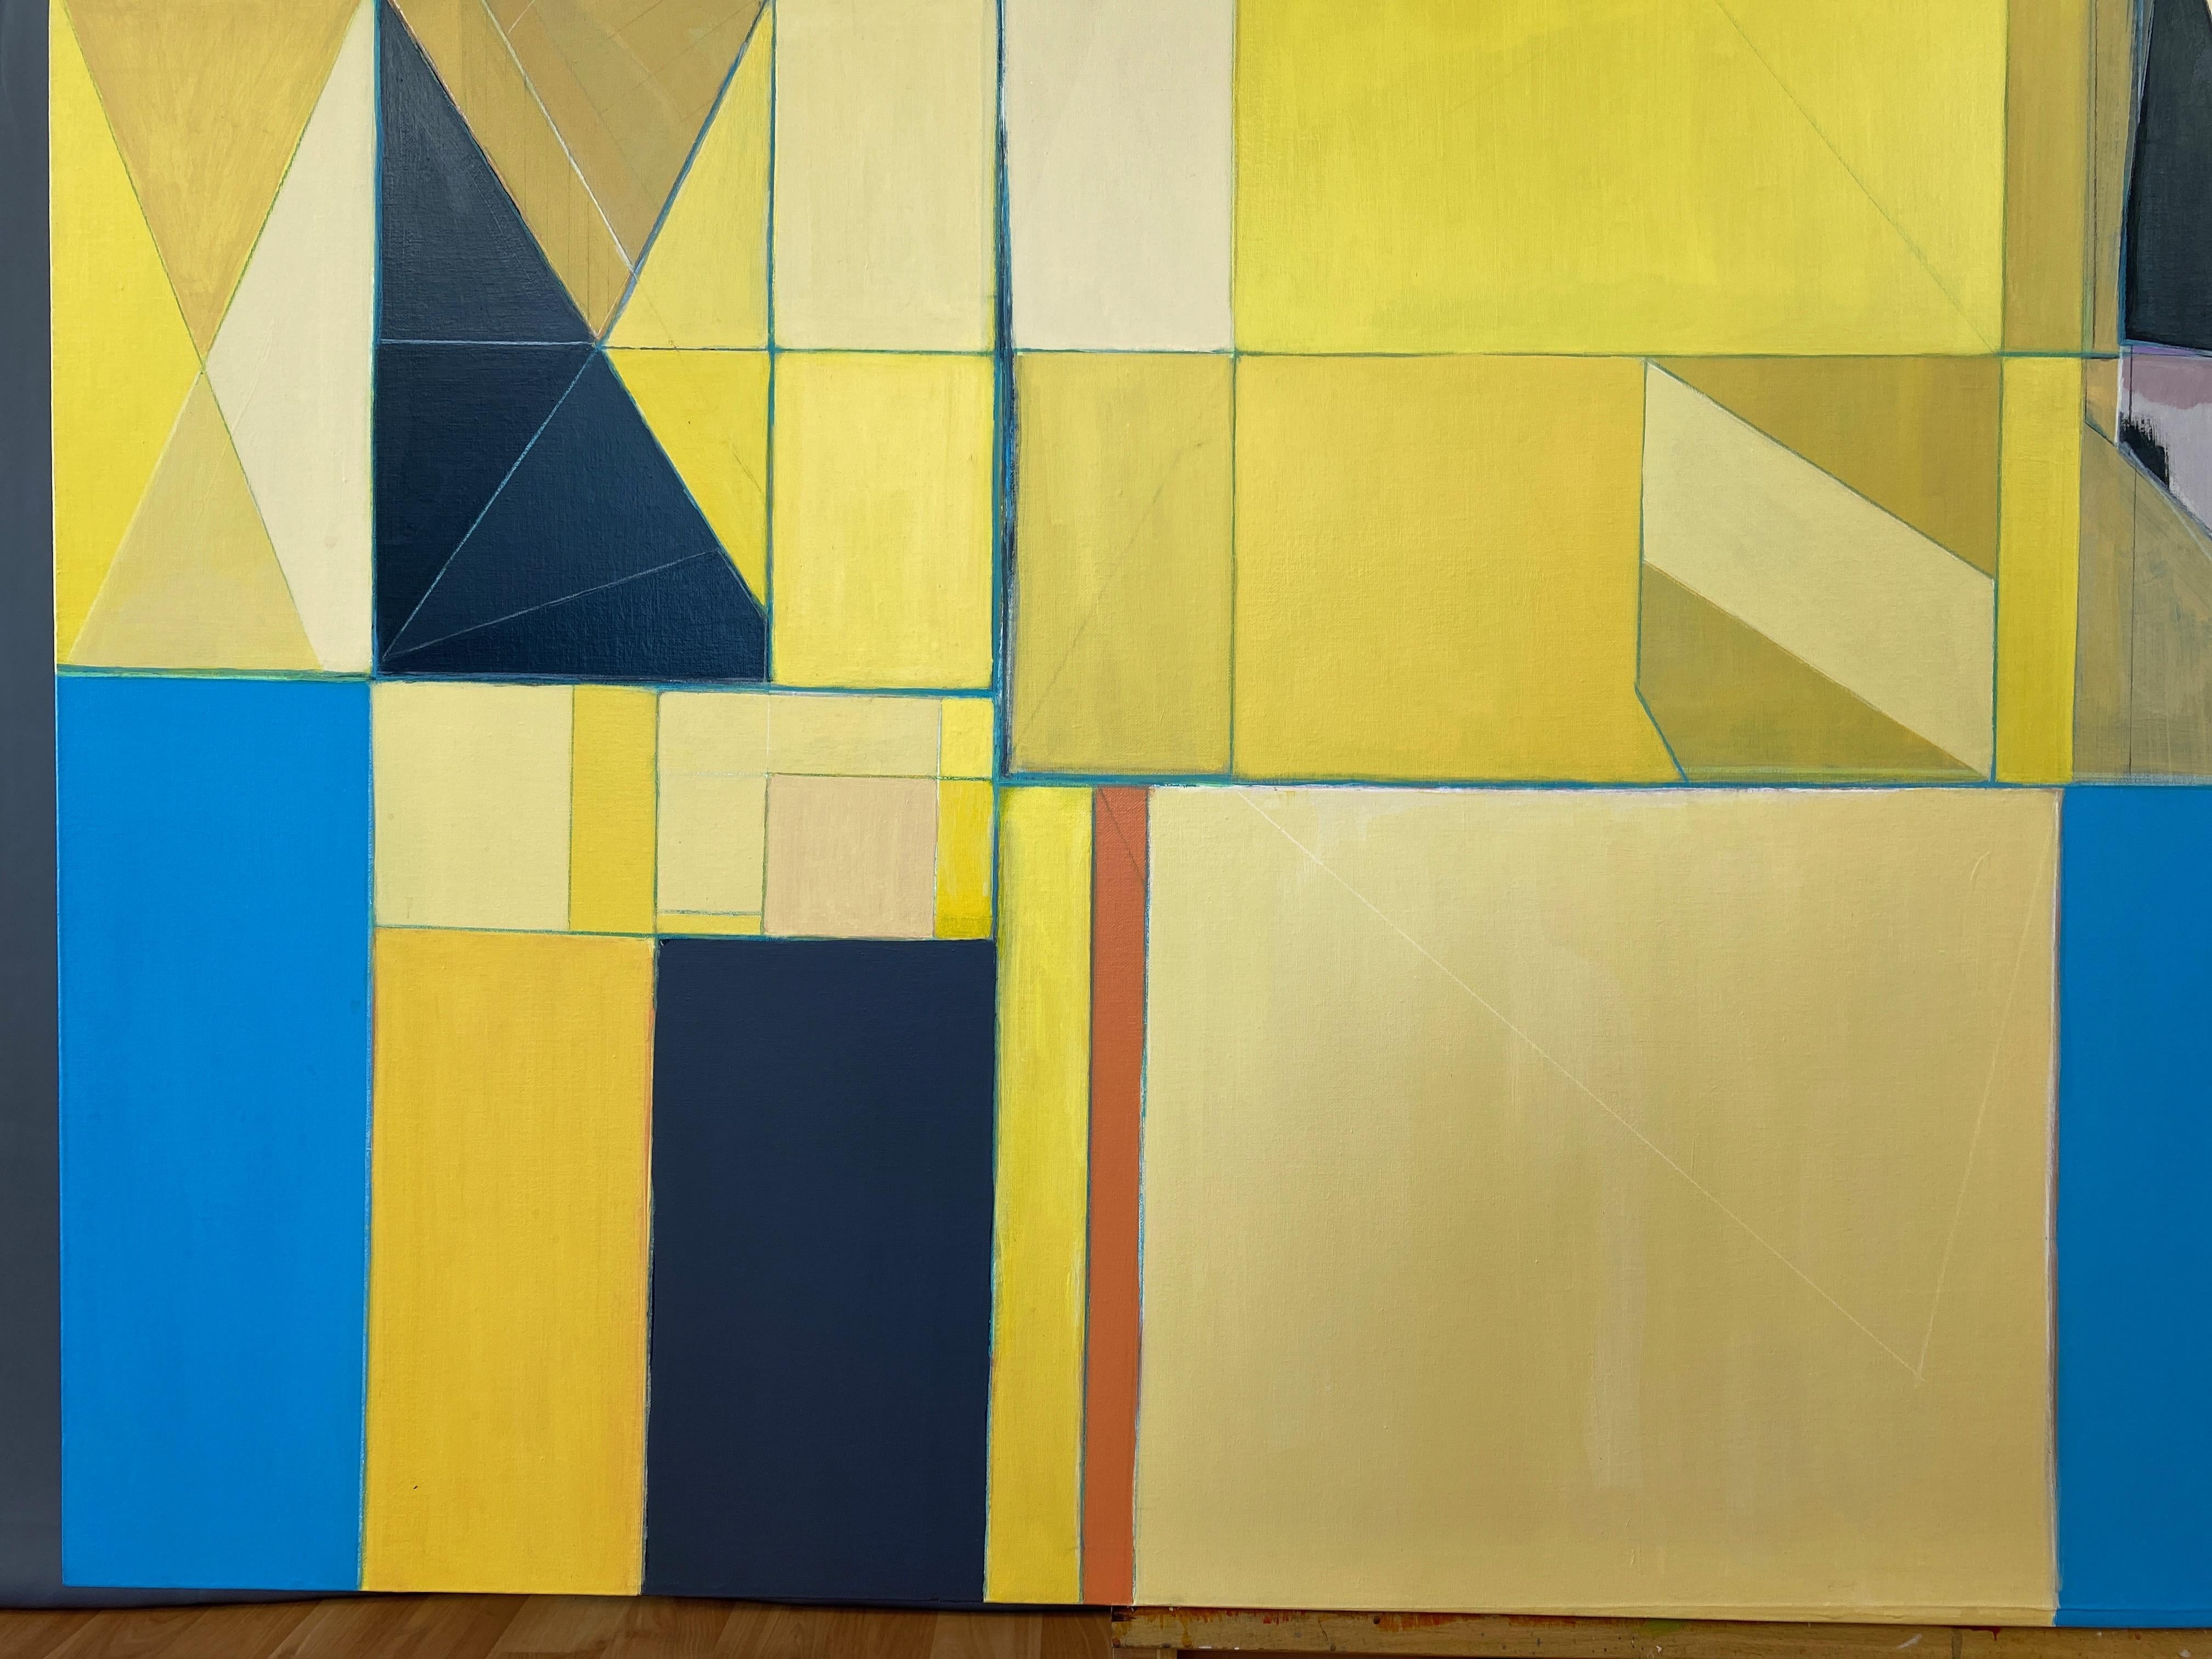 Robert English “Etheric Double”, Large Abstract Cubist Painting, 1994-1995 1